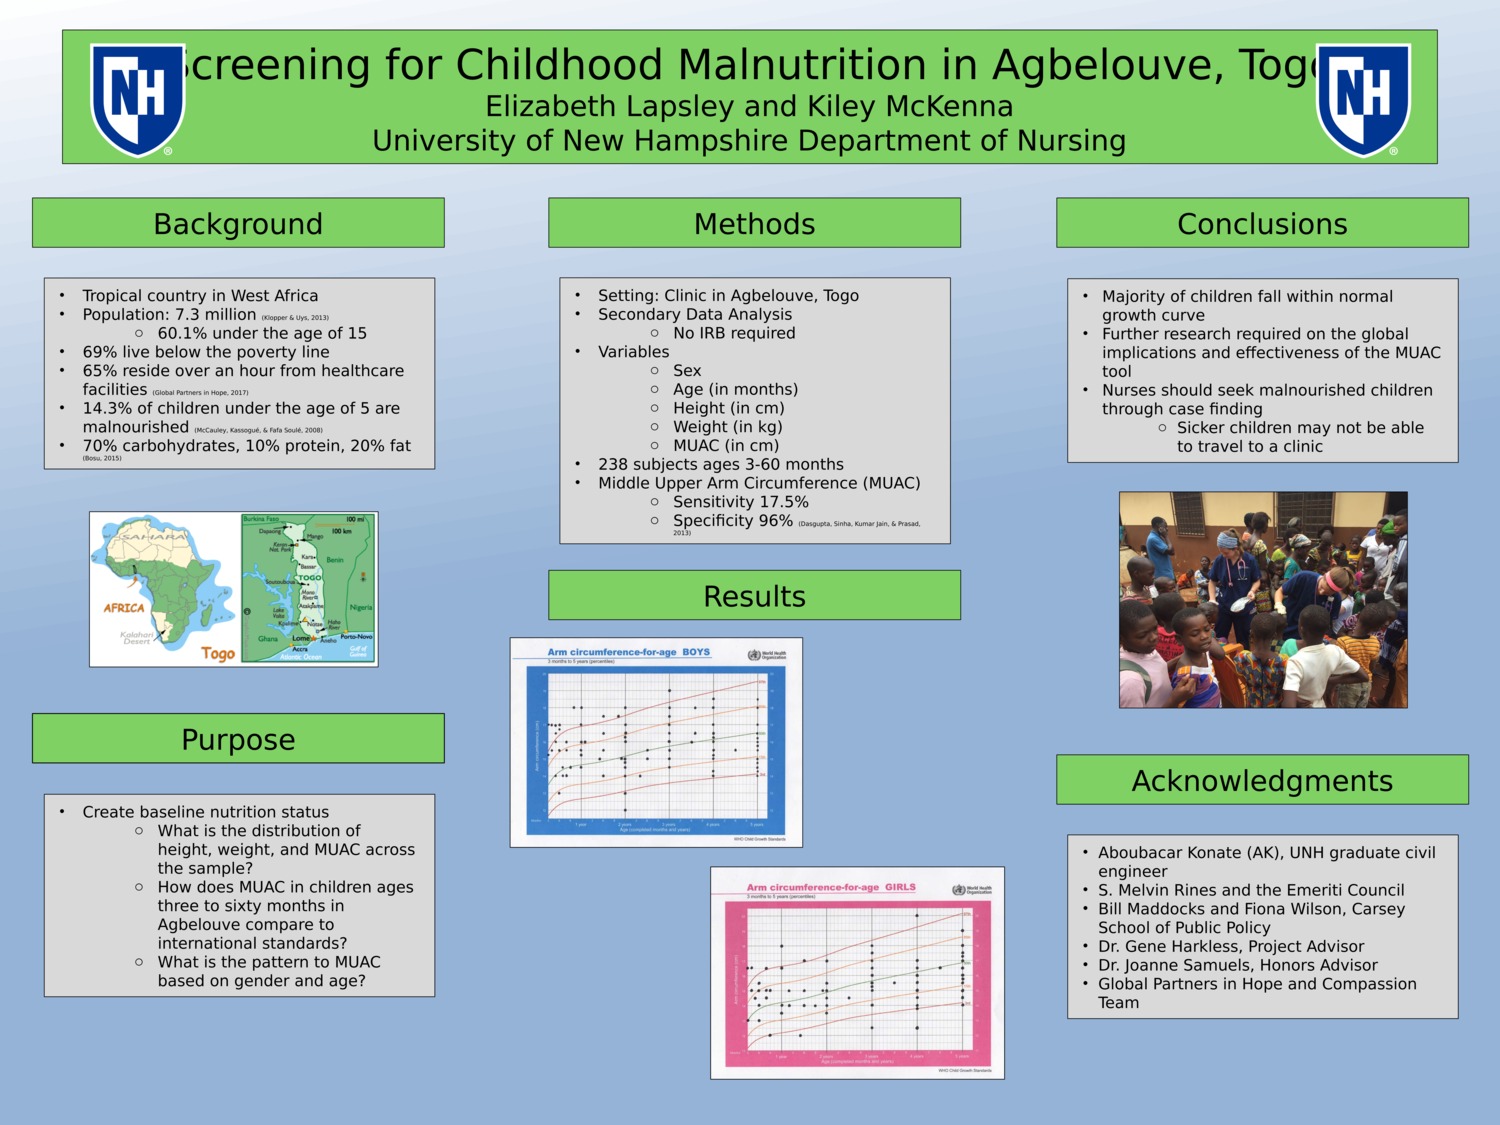 Screening For Malnutrition In Agbelouve, Togo by ehl2002